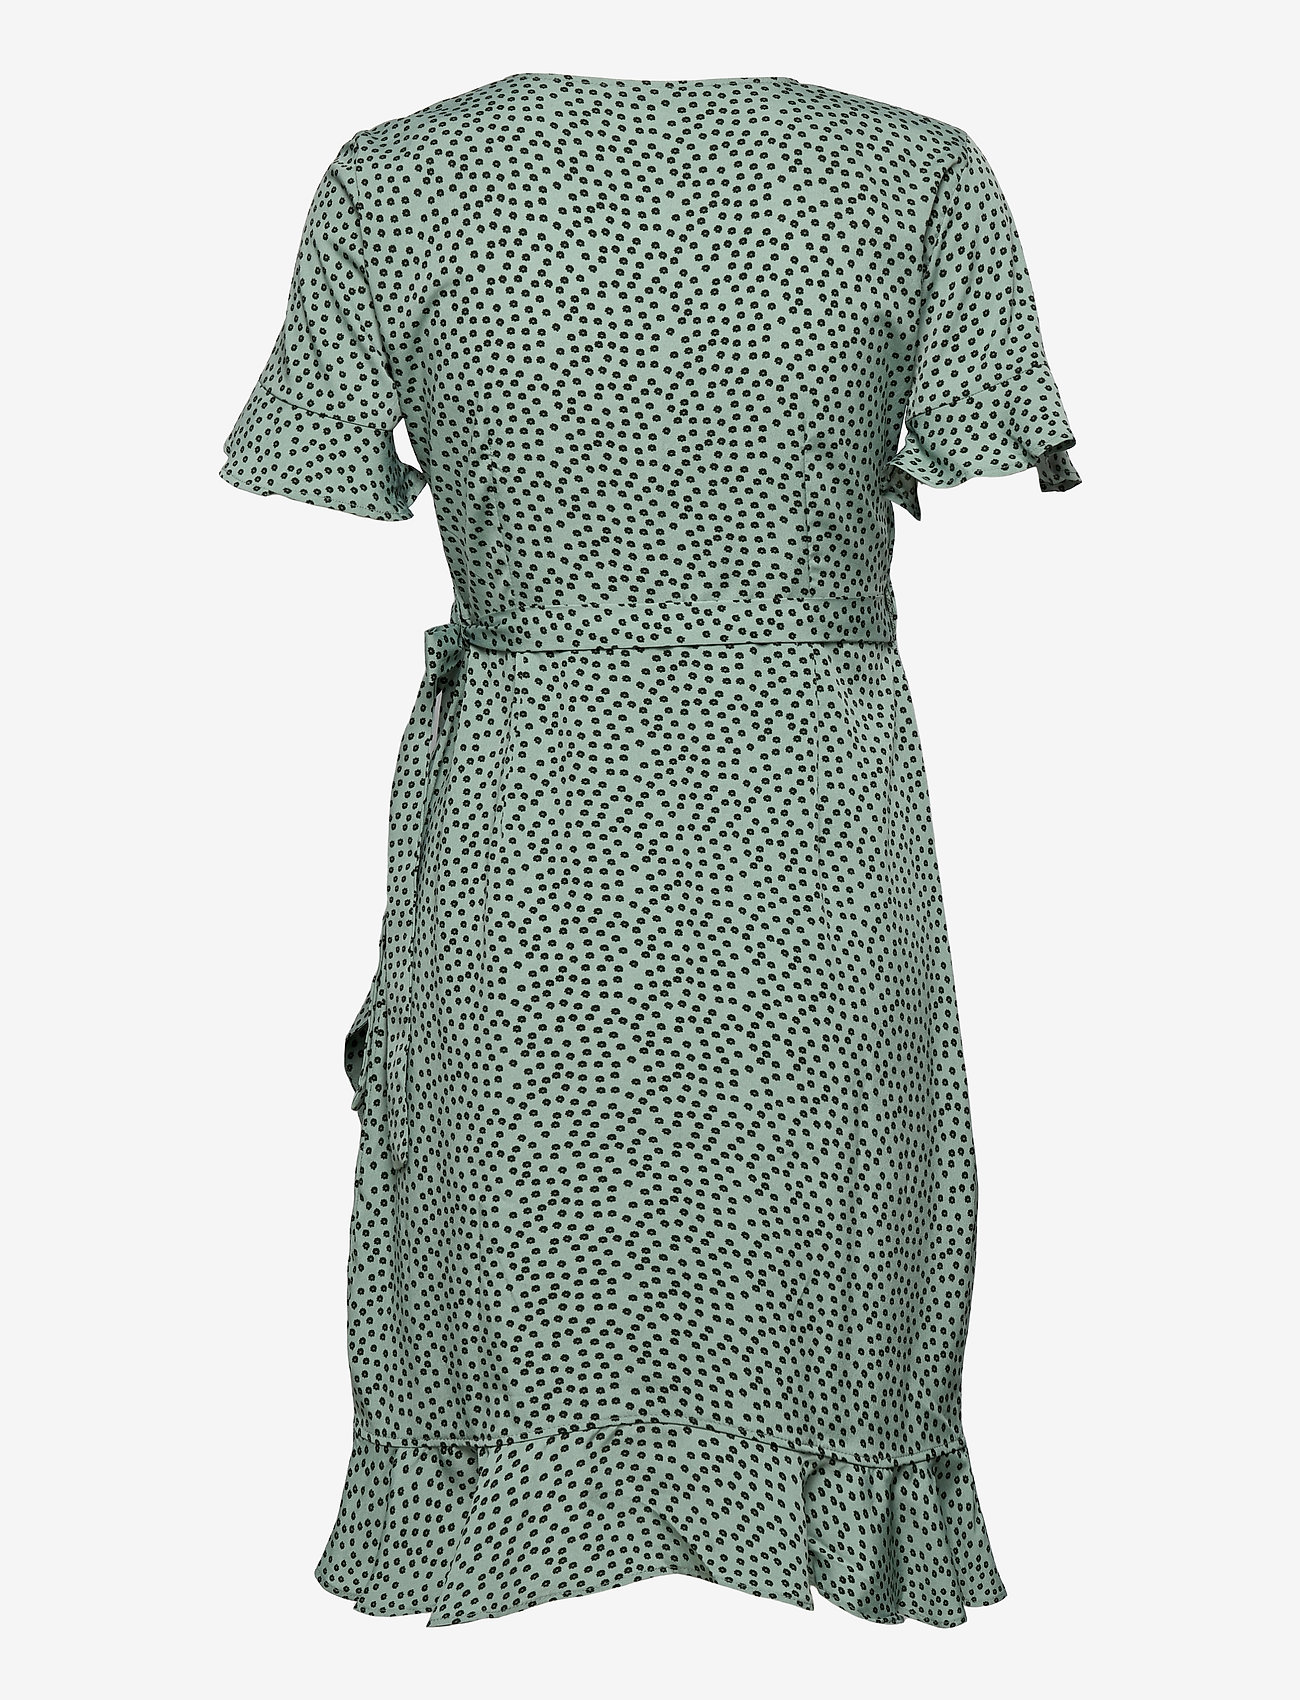 ONLY - ONLOLIVIA S/S WRAP DRESS WVN NOOS - madalaimad hinnad - chinois green - 1